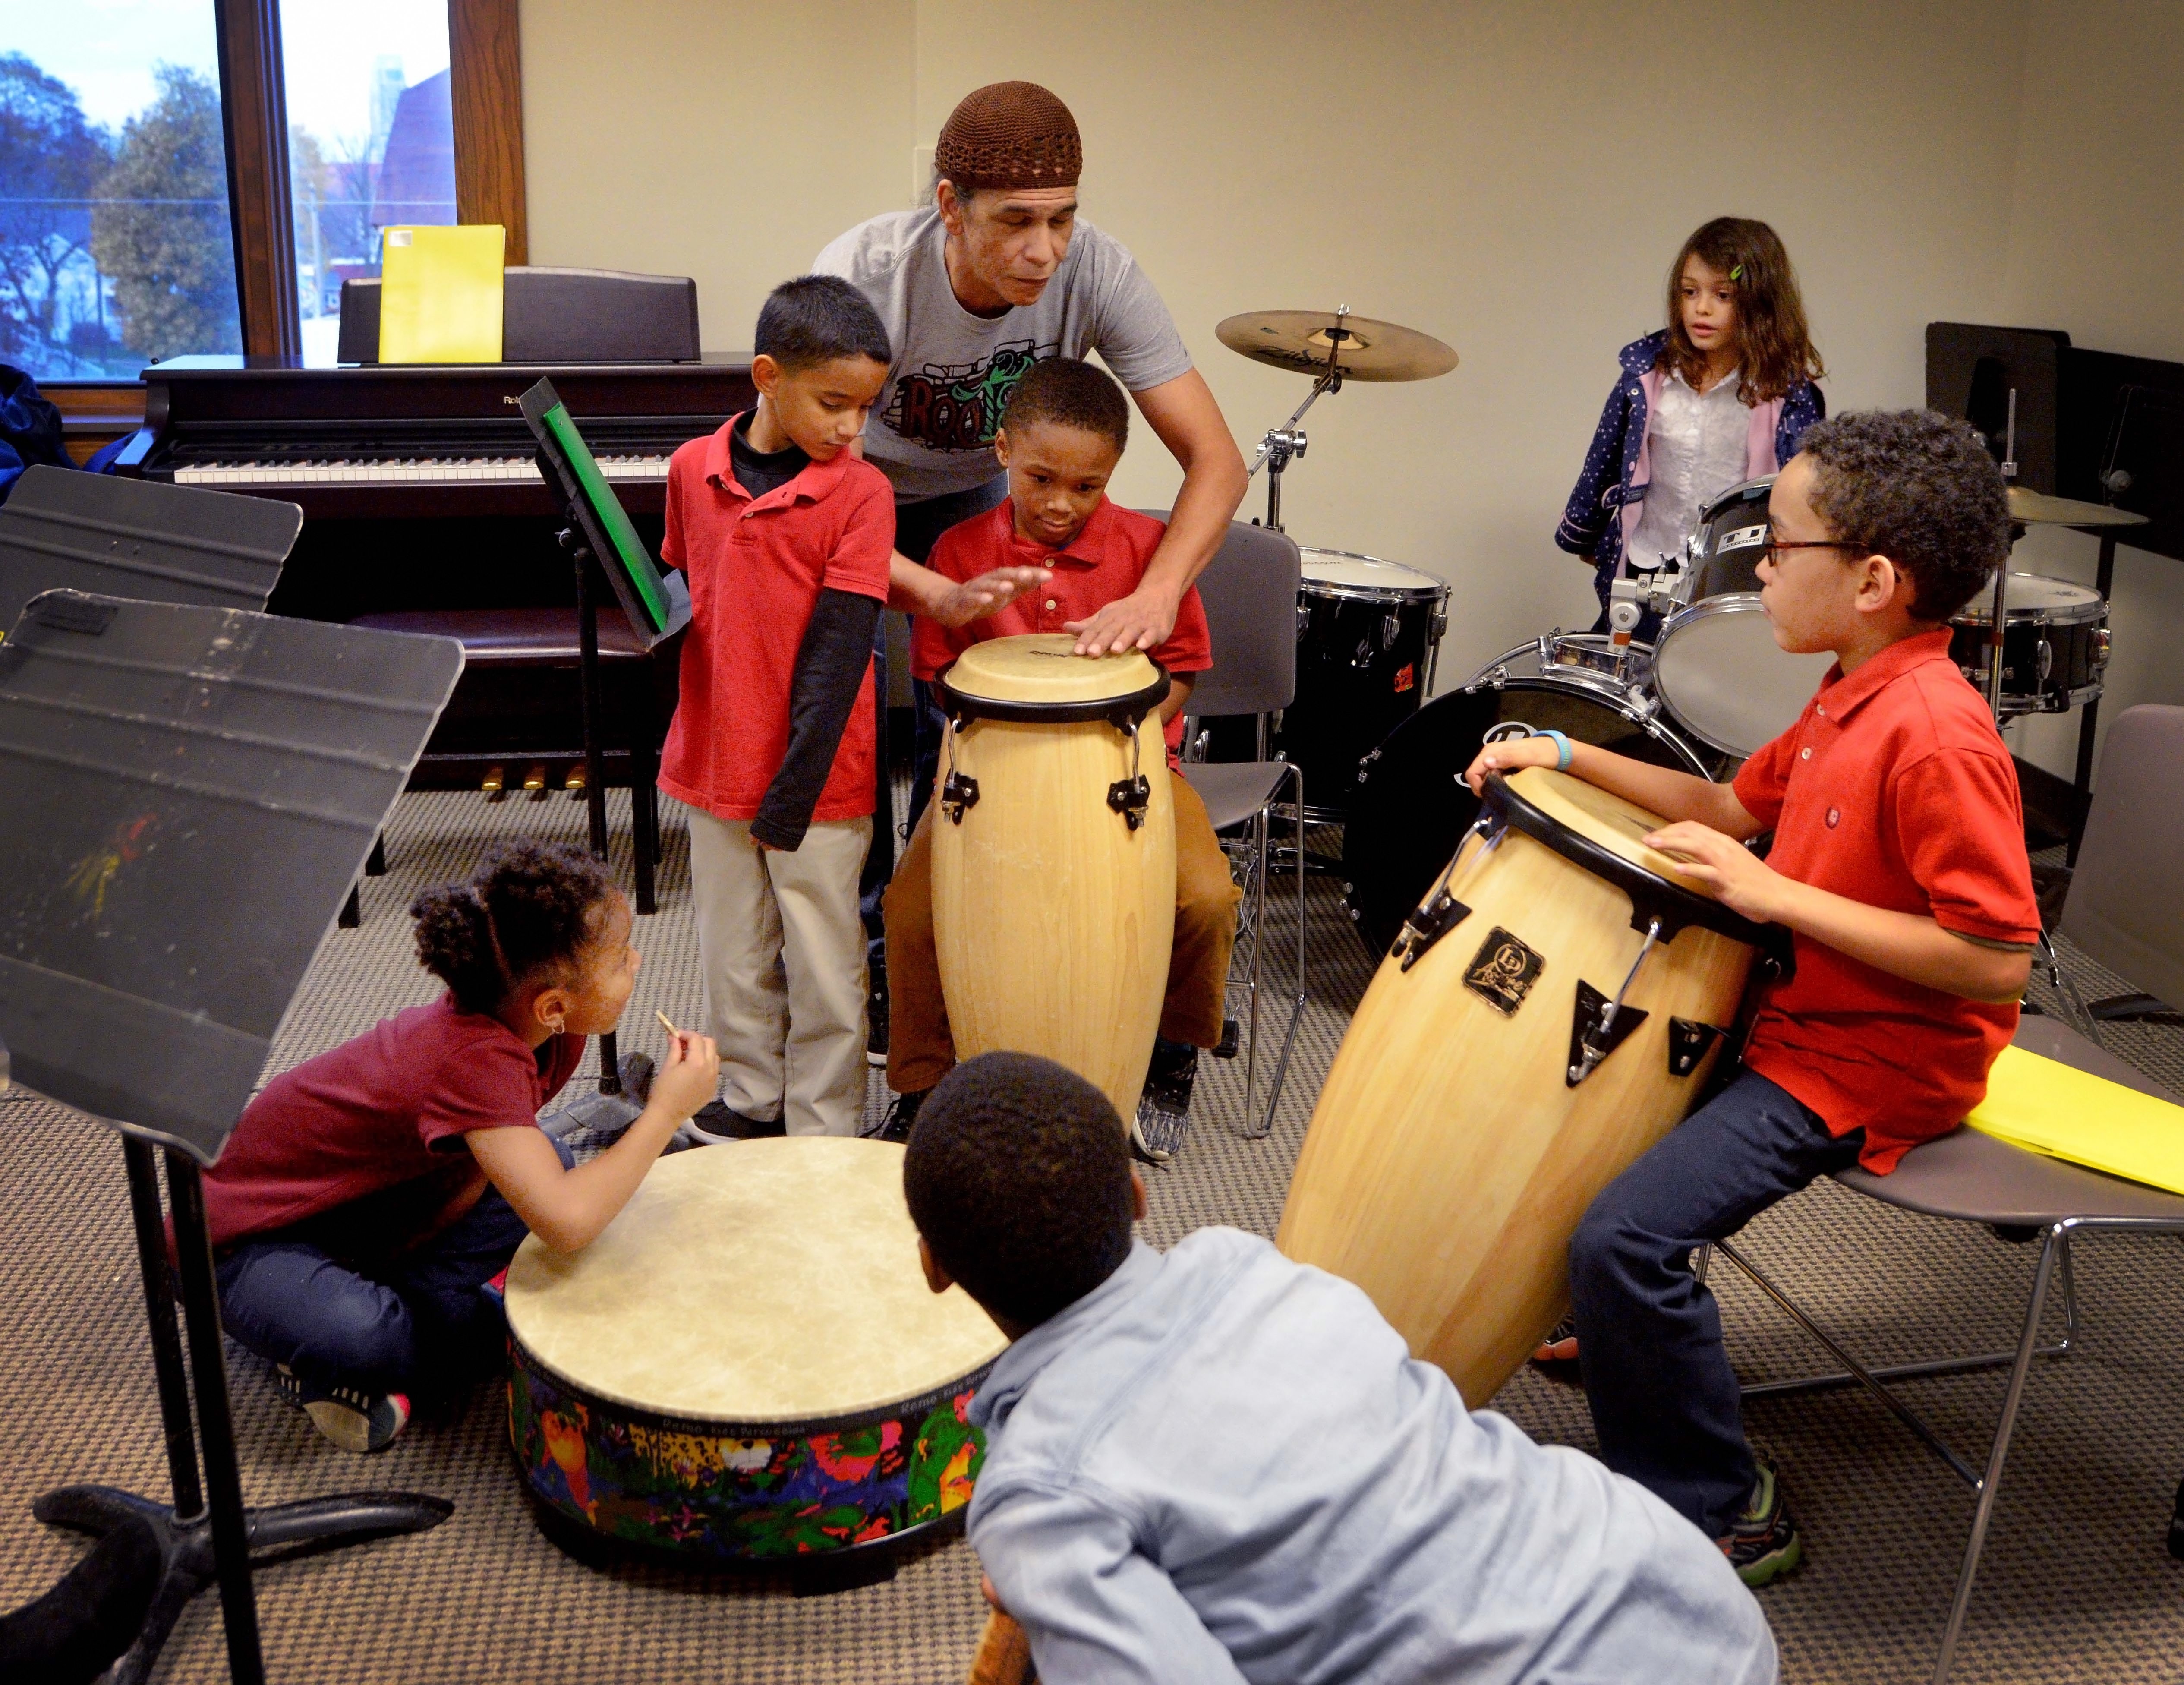 Hitting the High Notes: With programs growing, music educators work to remove deep-seated barriers